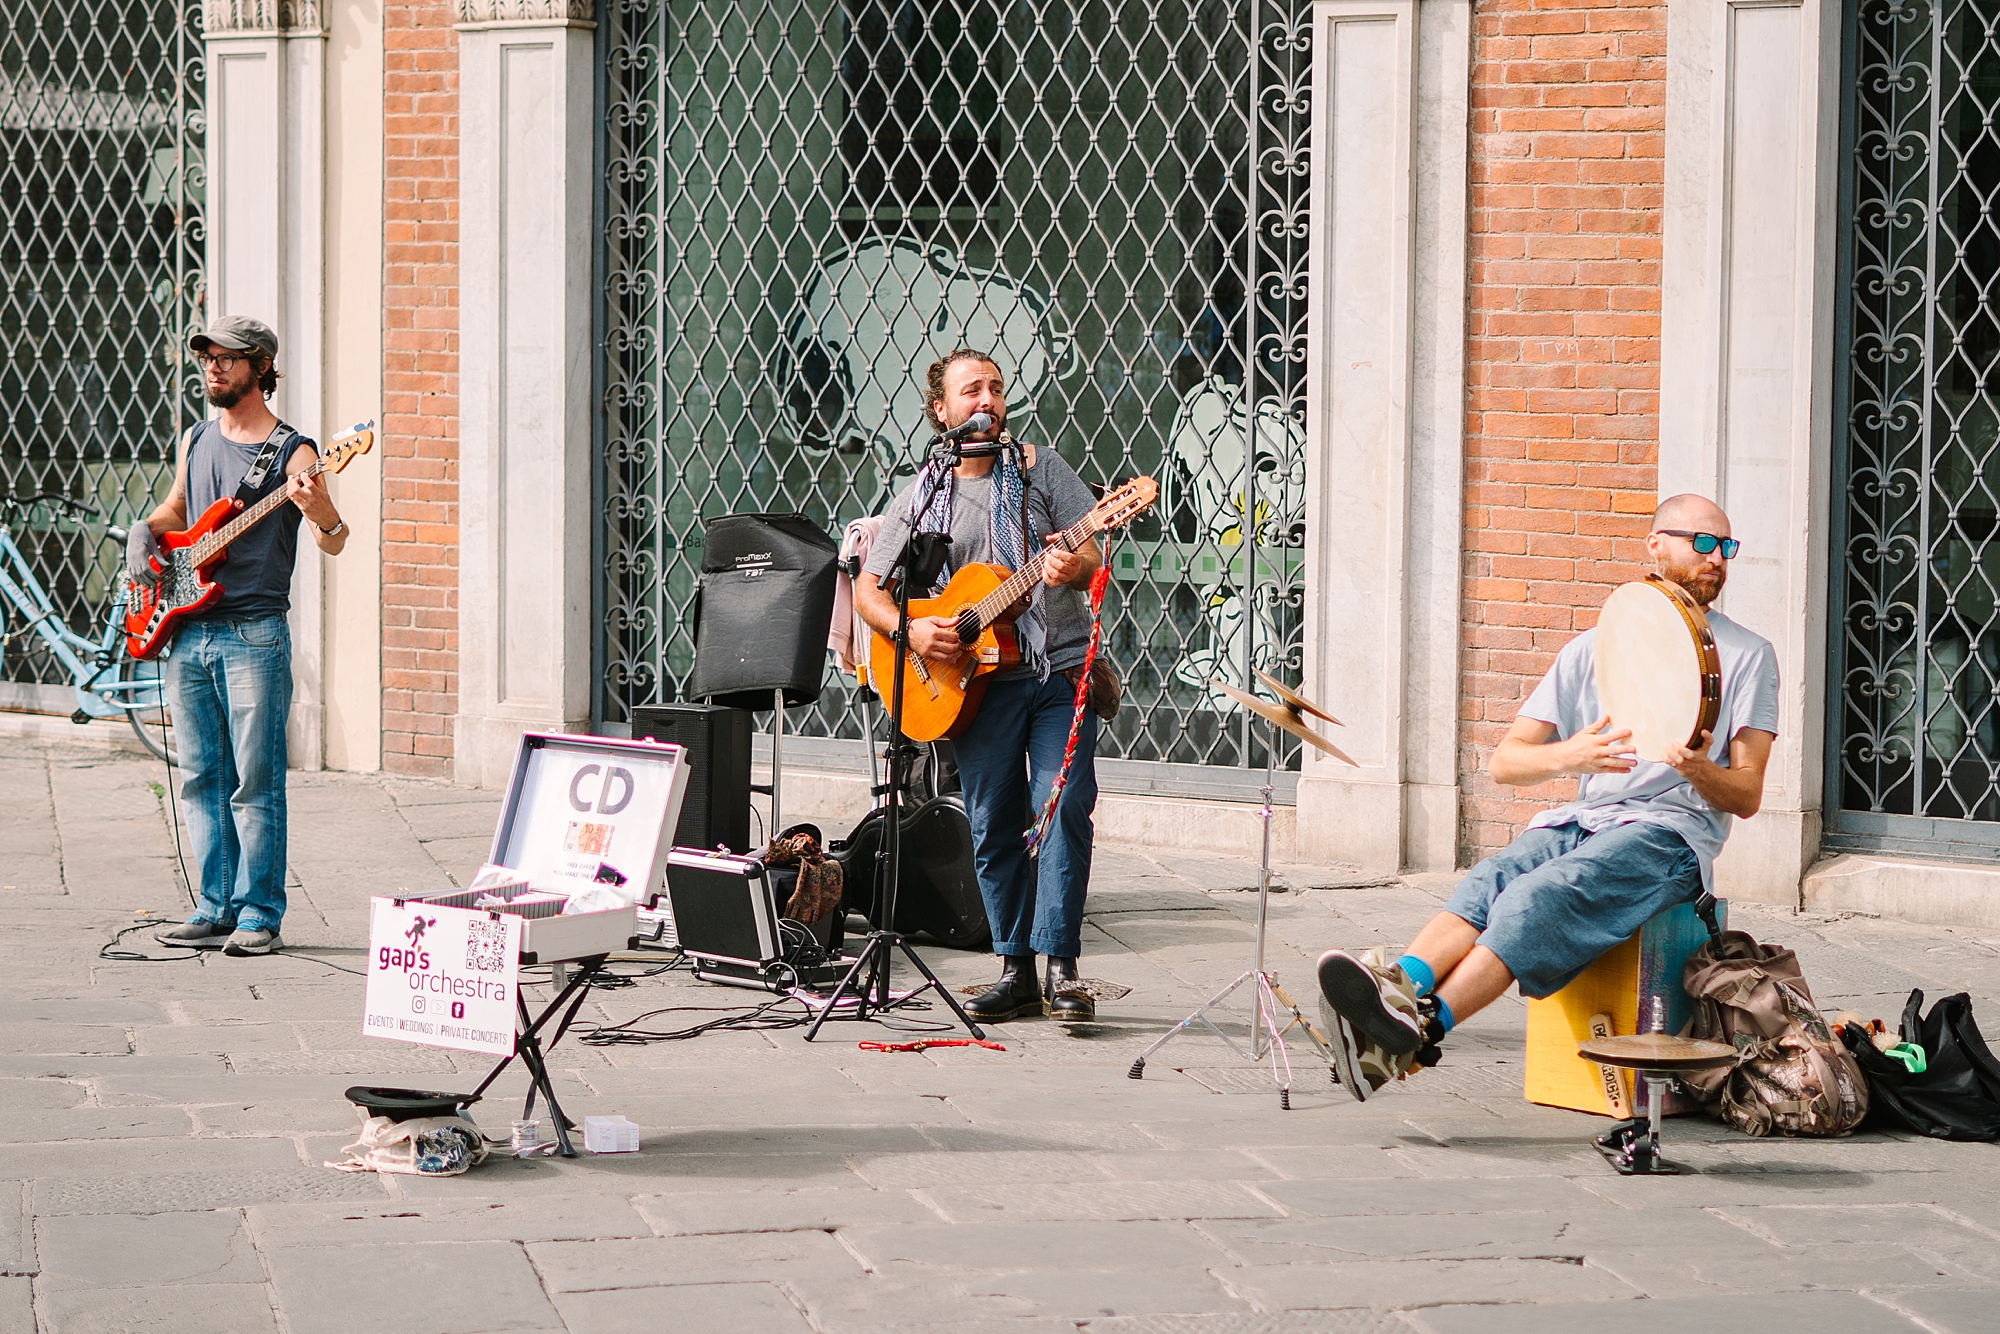 street musicians perform during trip to Italy